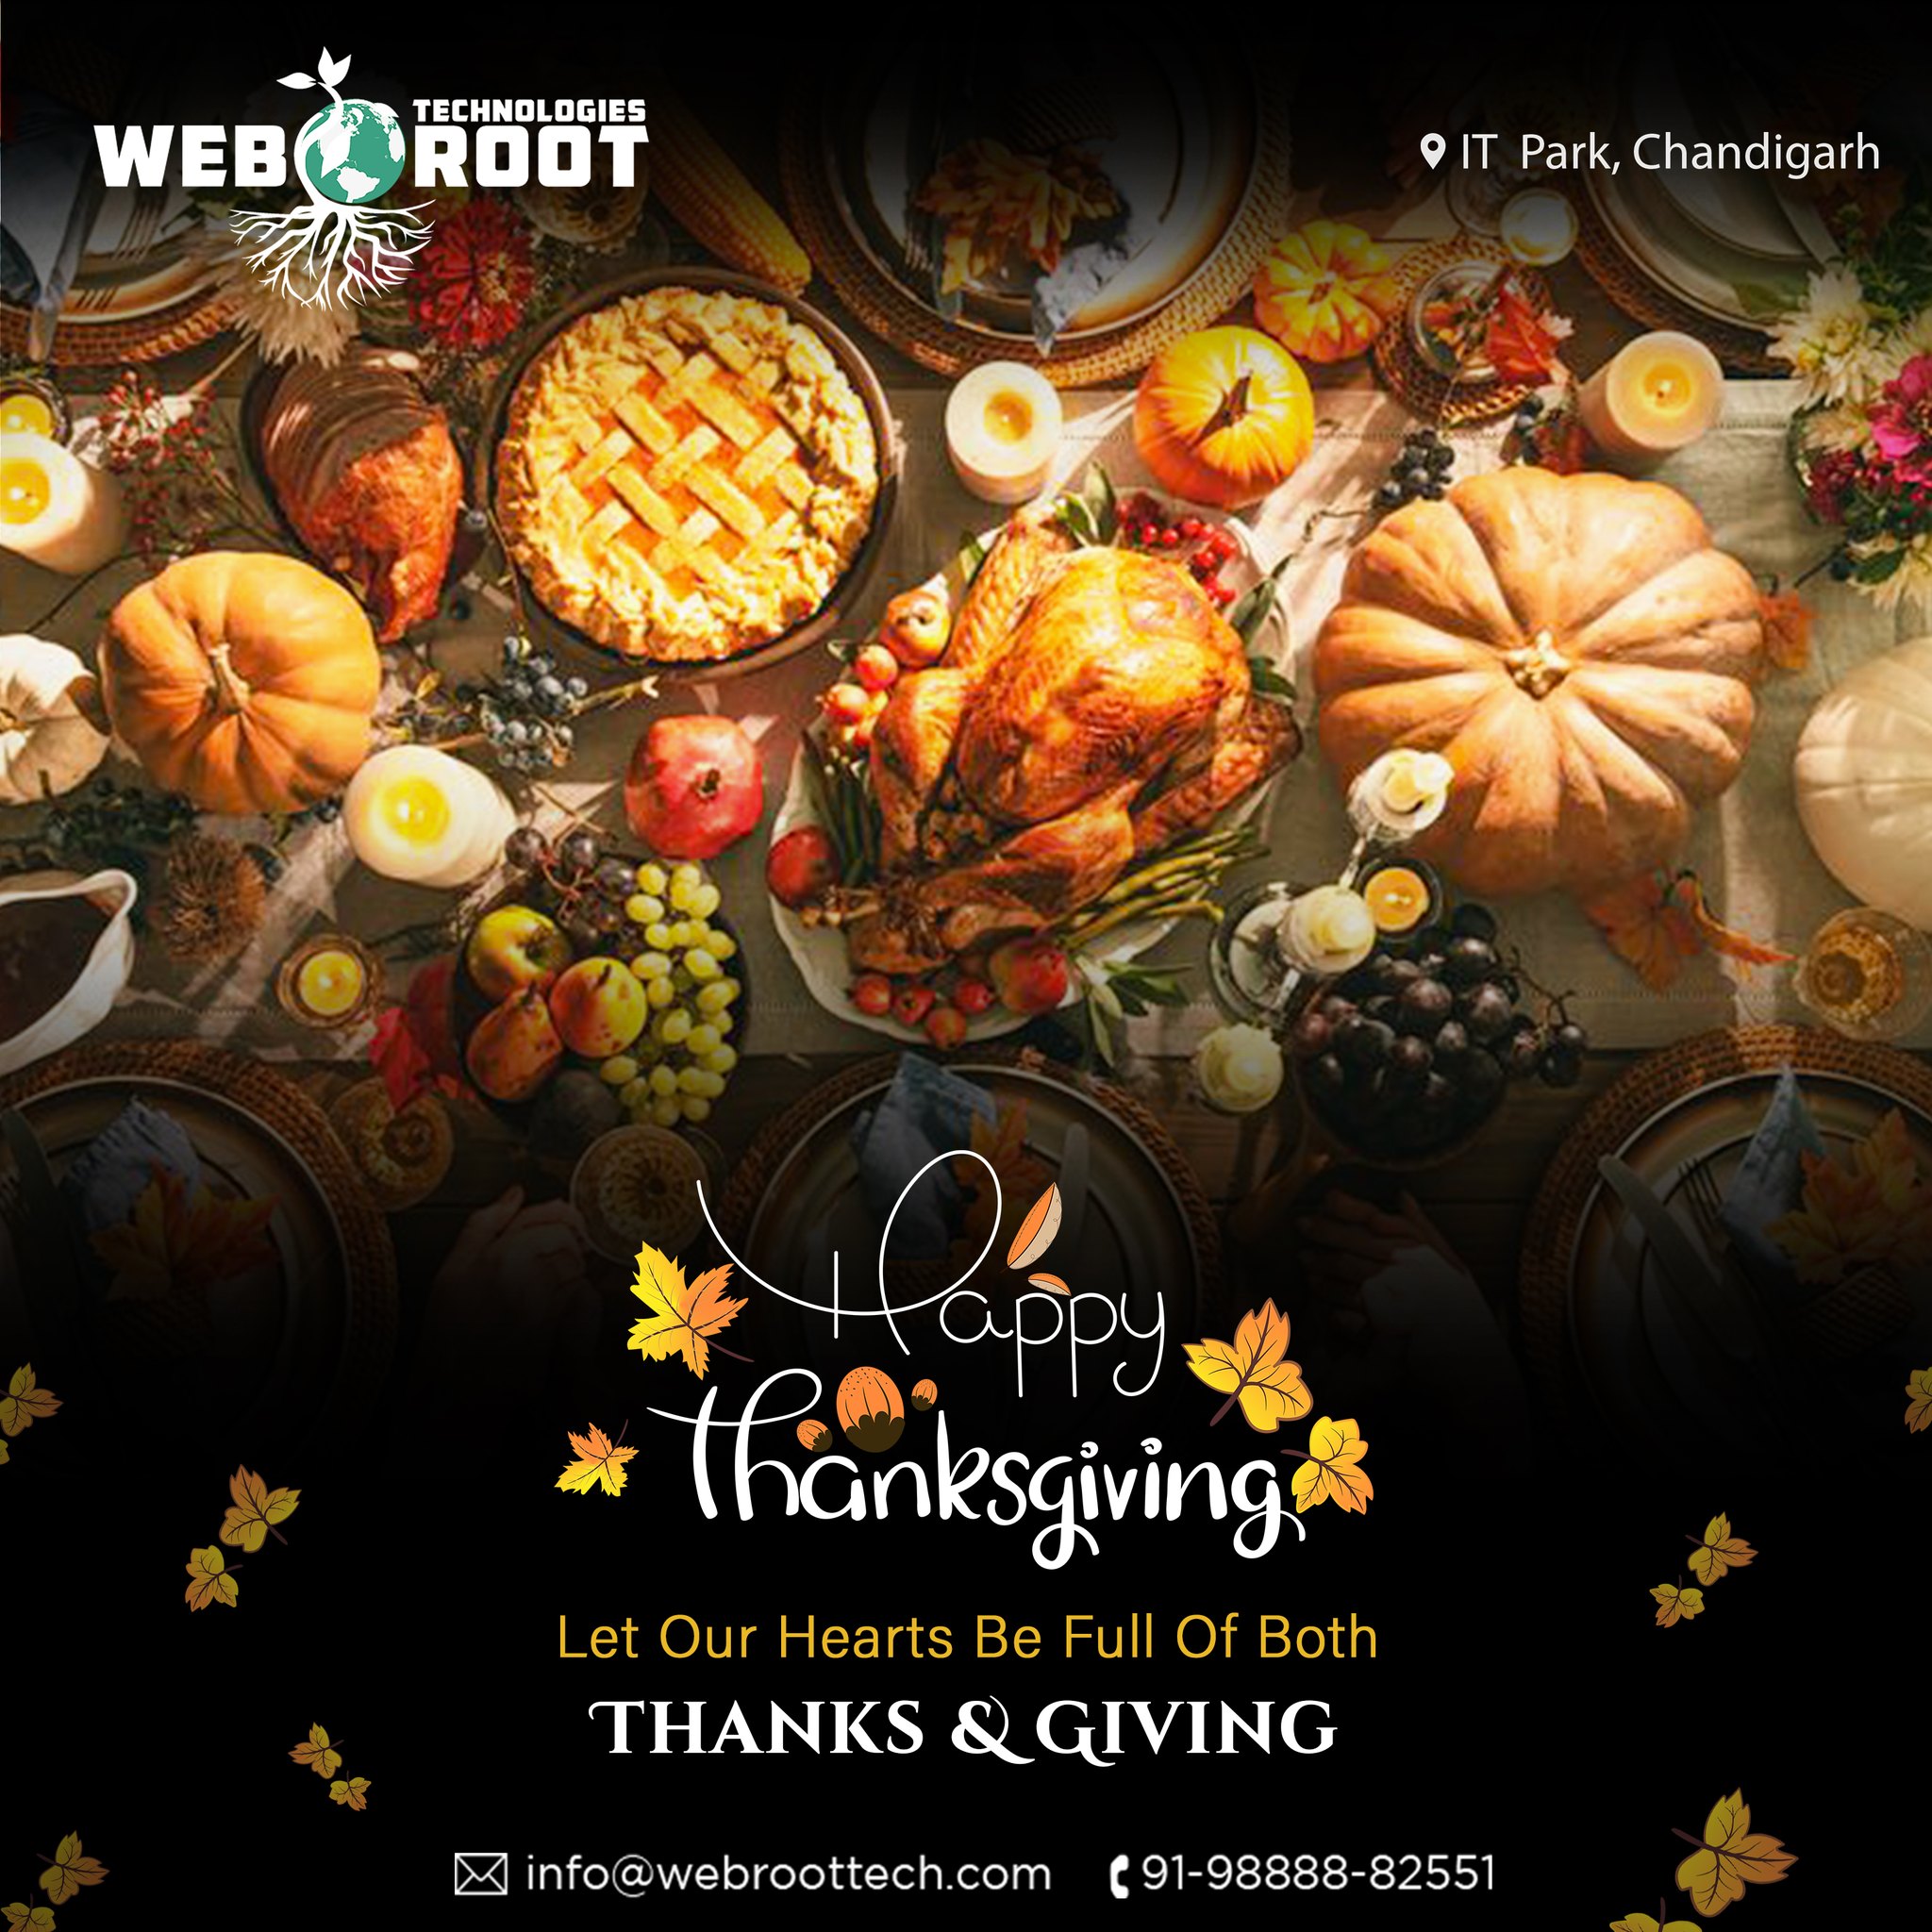 "Thanksgiving reminds us that no matter what life throws at us, we can take the charred remains and rebuild a life that is unimaginably richer than the one from which the shards and pieces fell."

Enjoy this day with your loved ones, and remember, we all have something to be thankful for! Webroot Technologies wishes you a day filled with love and gratitude. 

#Thanksgiving #ThanksgivingDay #Thanksgiving2022 #thanksgivingdinner #ThanksgivingRecipes #thanksgivingcookies #gratitude #love #life #kindness #kindnessismagic #webroottechnologies #branding #digitalcompany #creative #designer #business #success #brandidentity #branding #brandidentity #brandidentitydesign